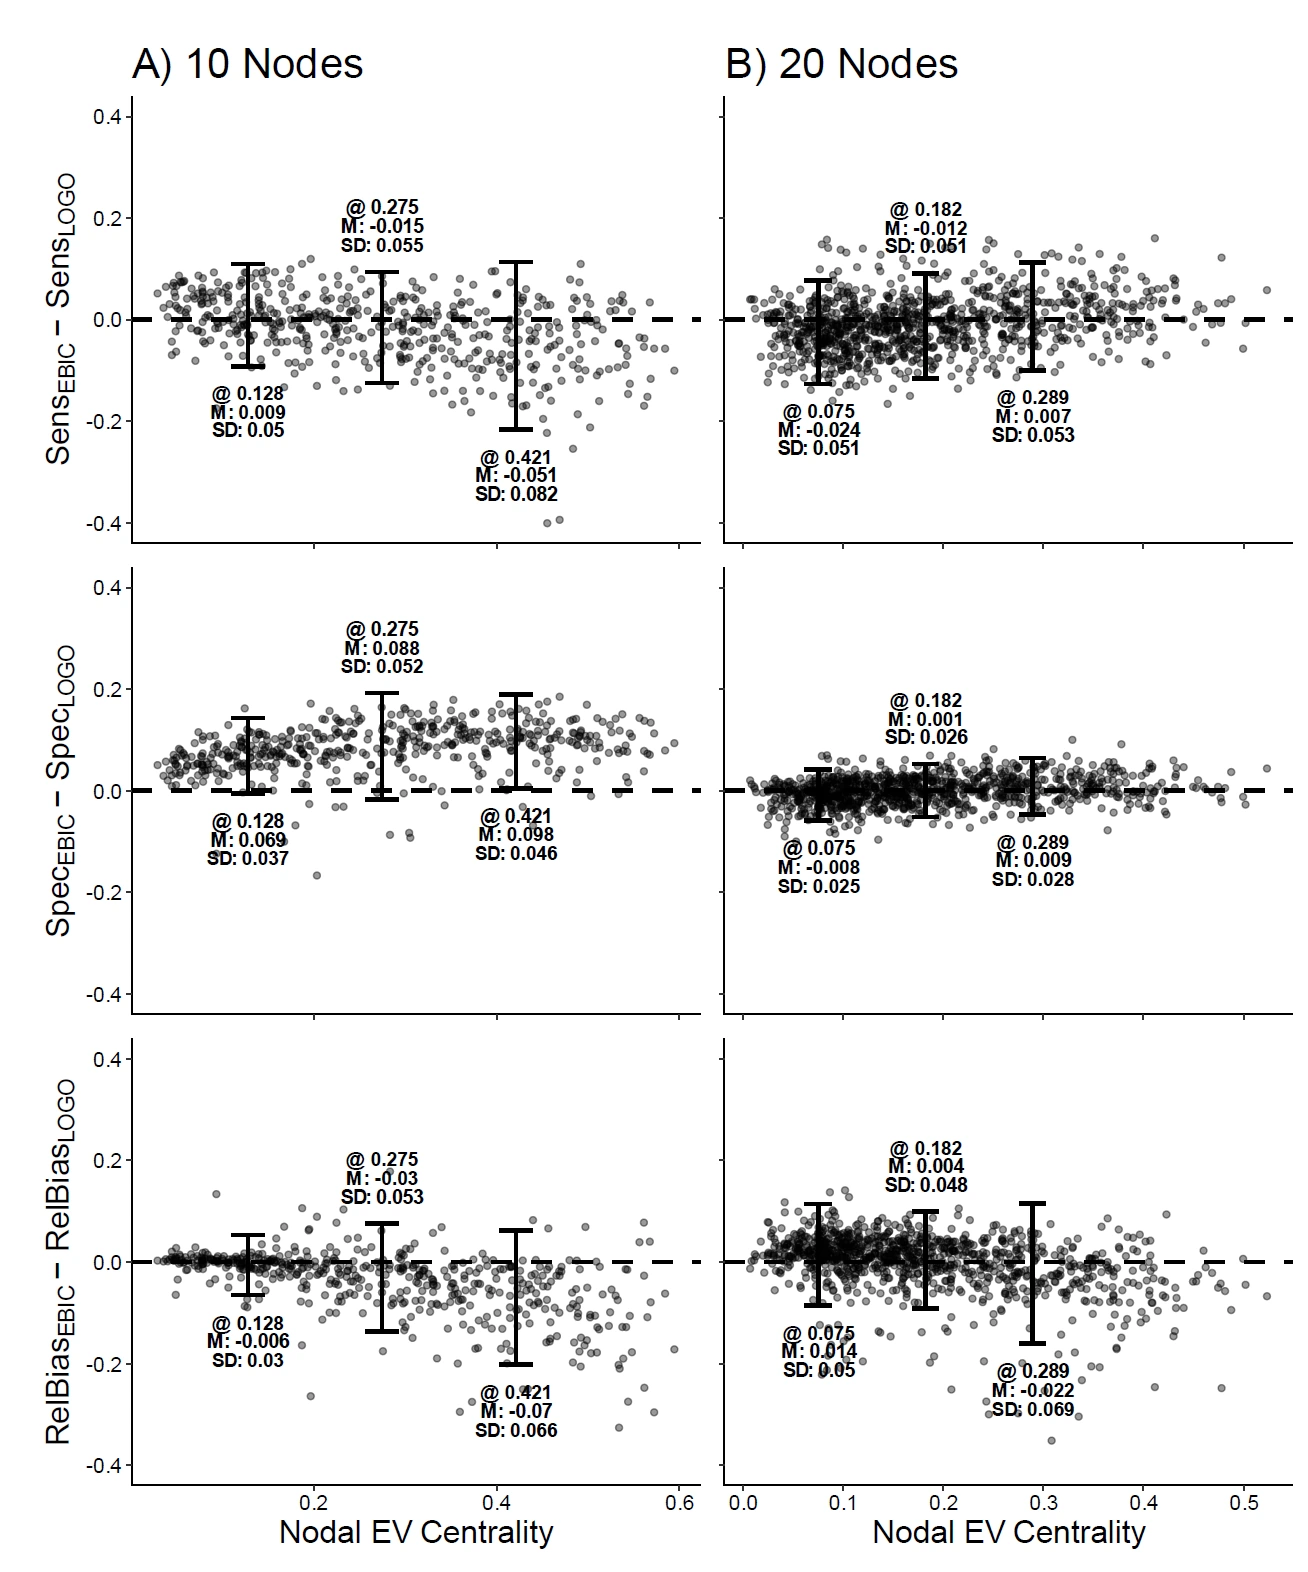 Similar to Figure 4, this bar graph shows comparisons between EBICglasso and LoGo-TMFG regarding sensitivity, specificity, and bias at various levels of nodal eigenvector centrality, displaying data trends across the scale of centrality.